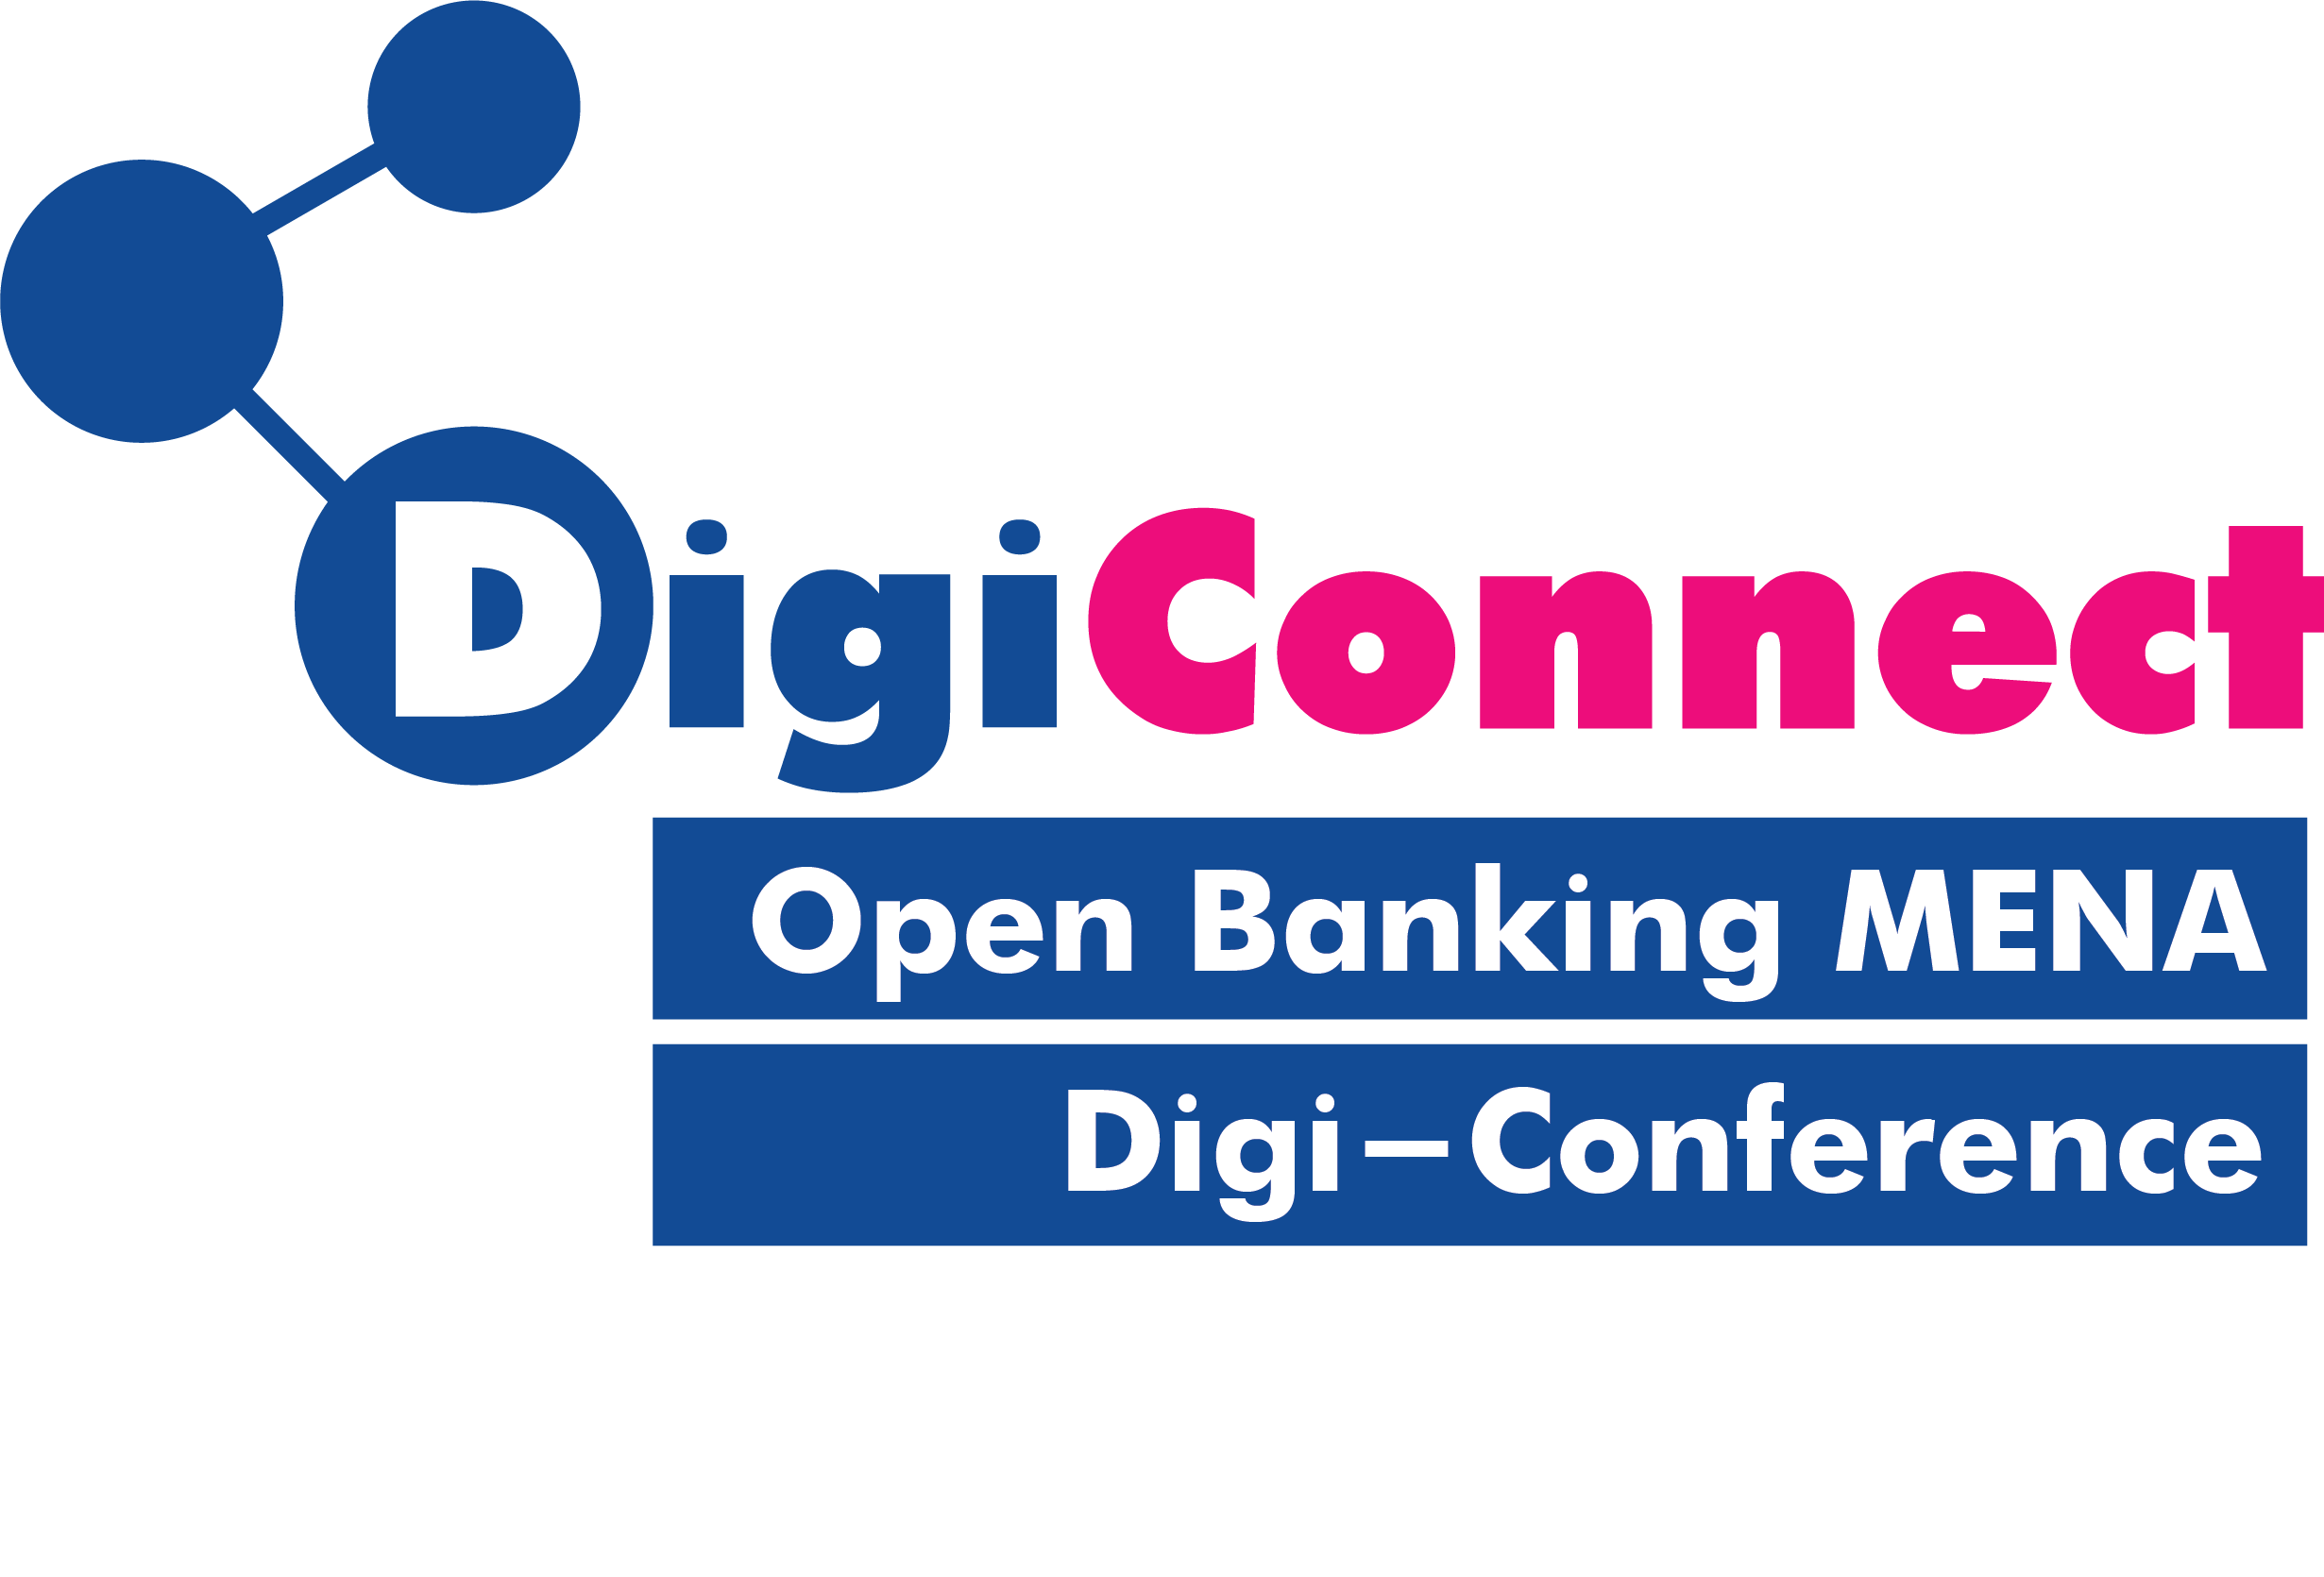 Open Banking MENA Digi-Conference organized by The Great Minds Group